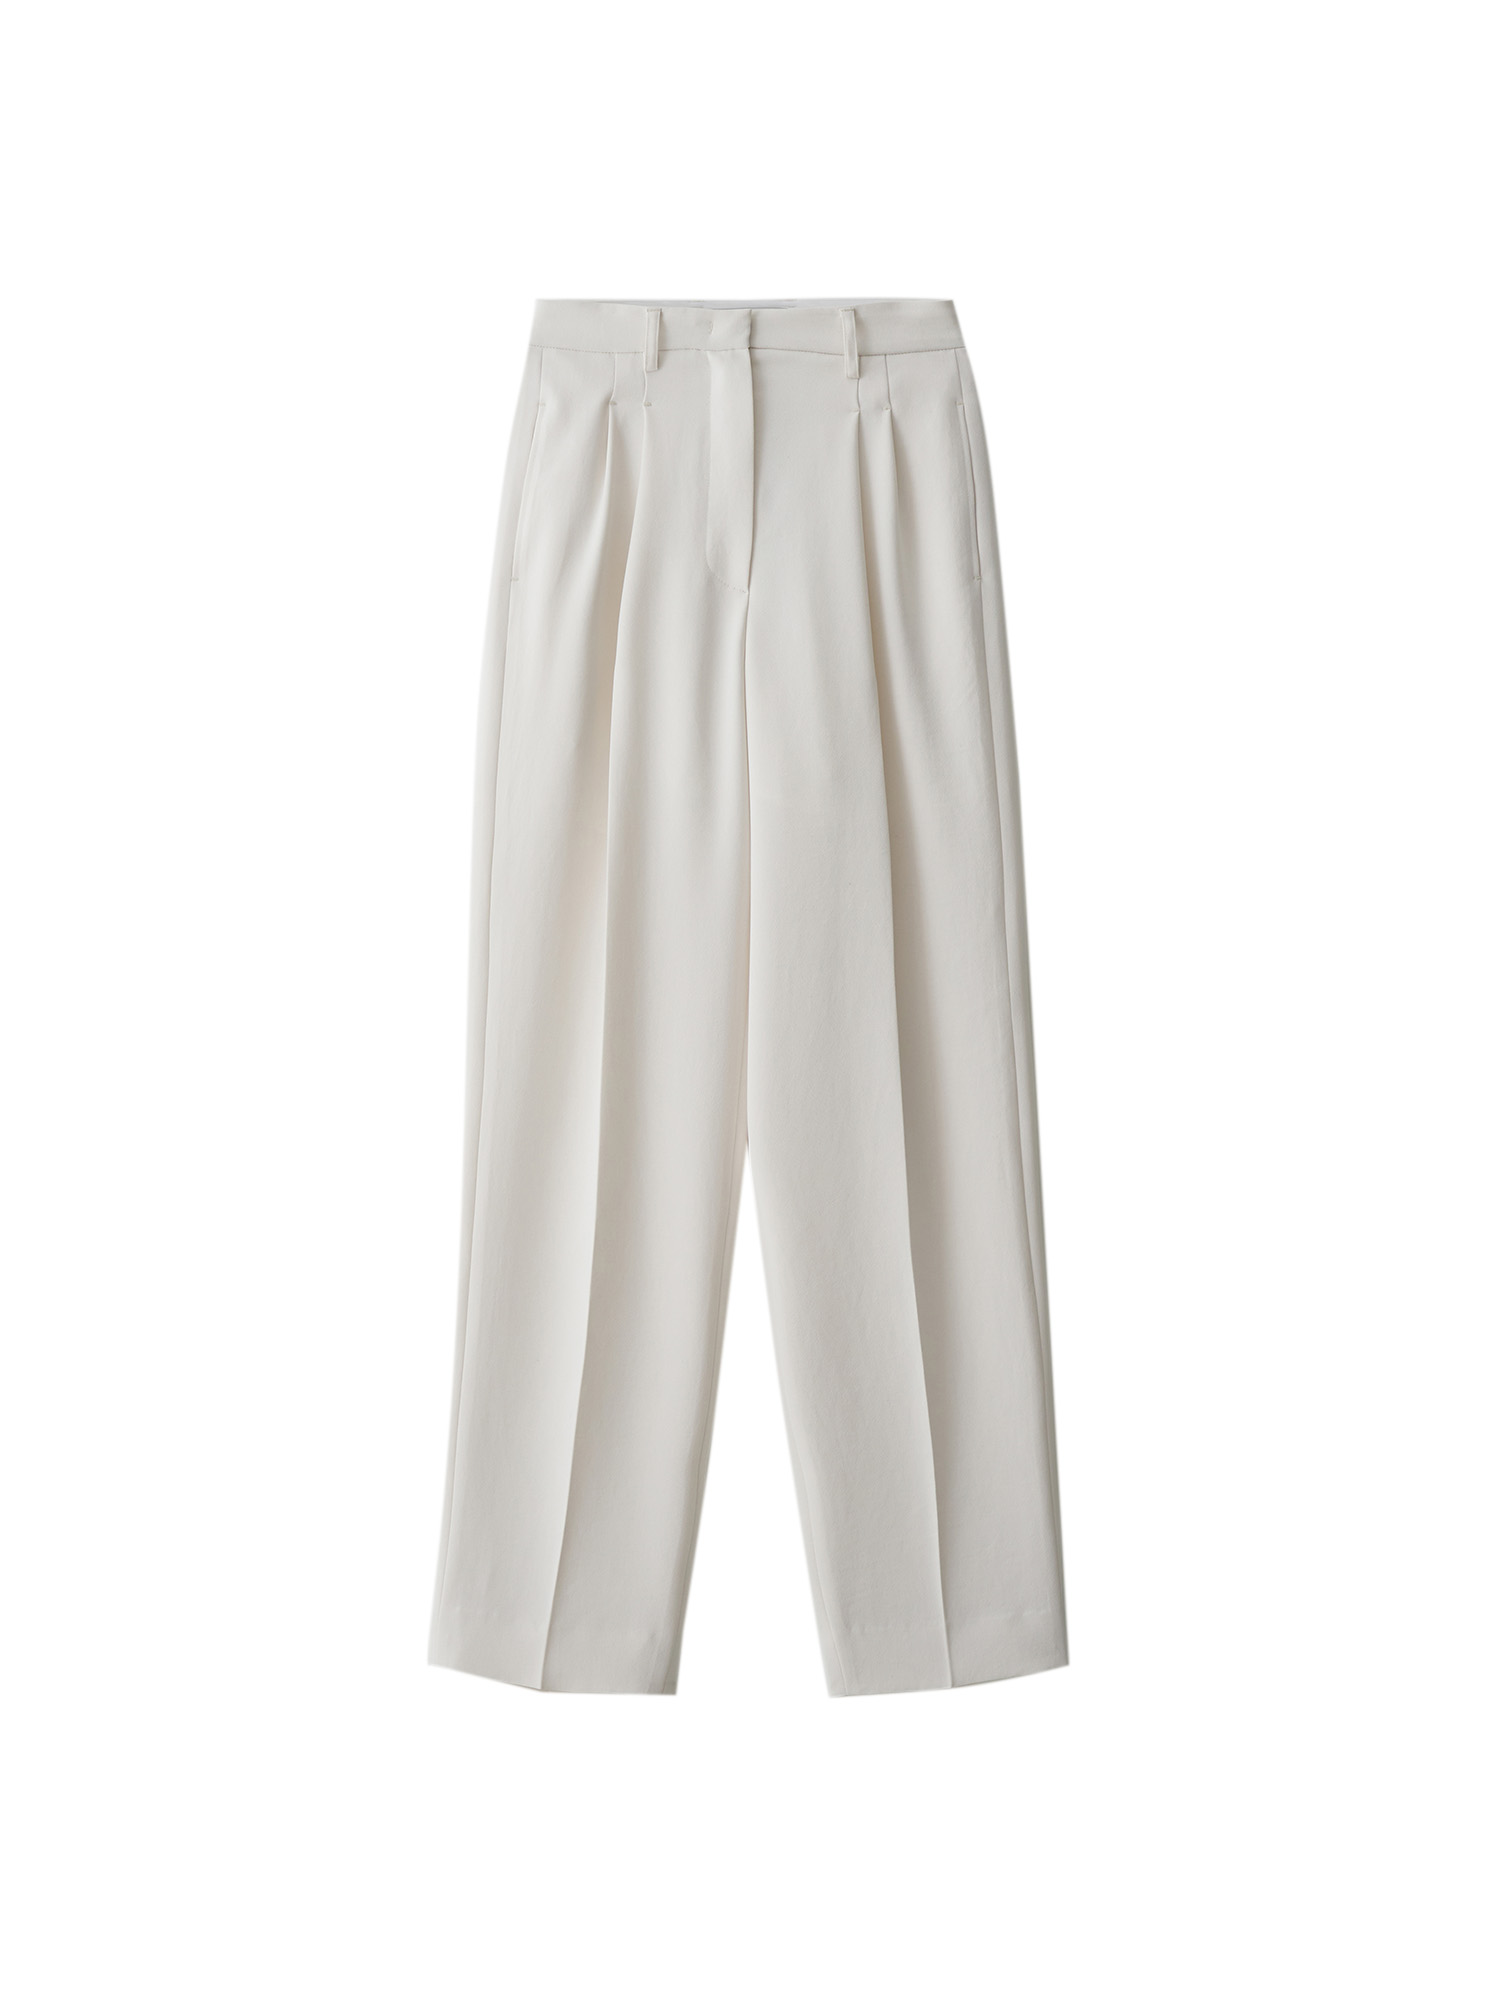 Relaxed Fit Two Tuck Pants - Ivory